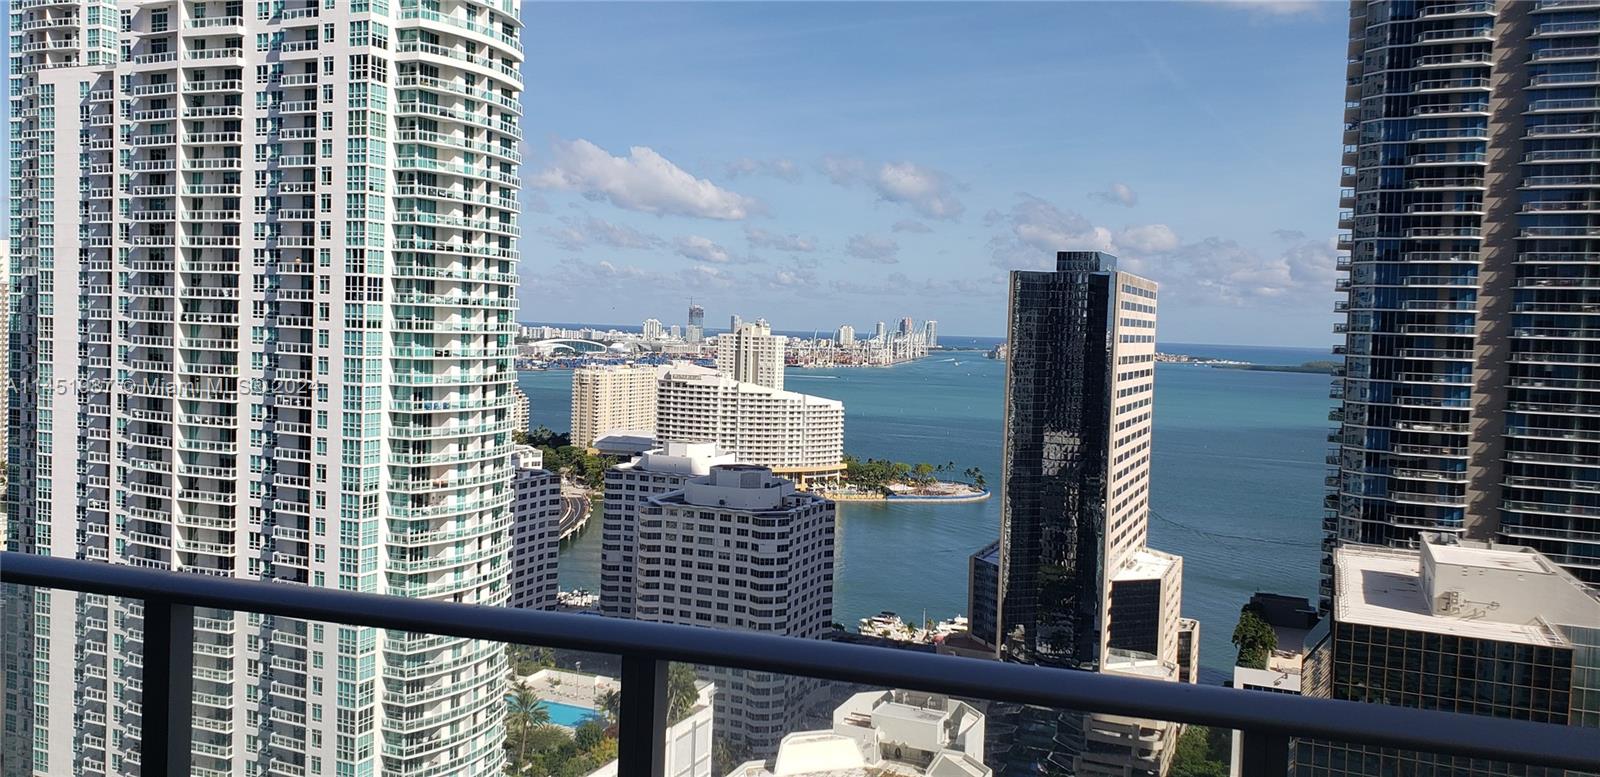 1010 Brickell Ave 3205, Miami, Florida 33131, 3 Bedrooms Bedrooms, ,3 BathroomsBathrooms,Residential,For Sale,1010 Brickell Ave 3205,A11451987